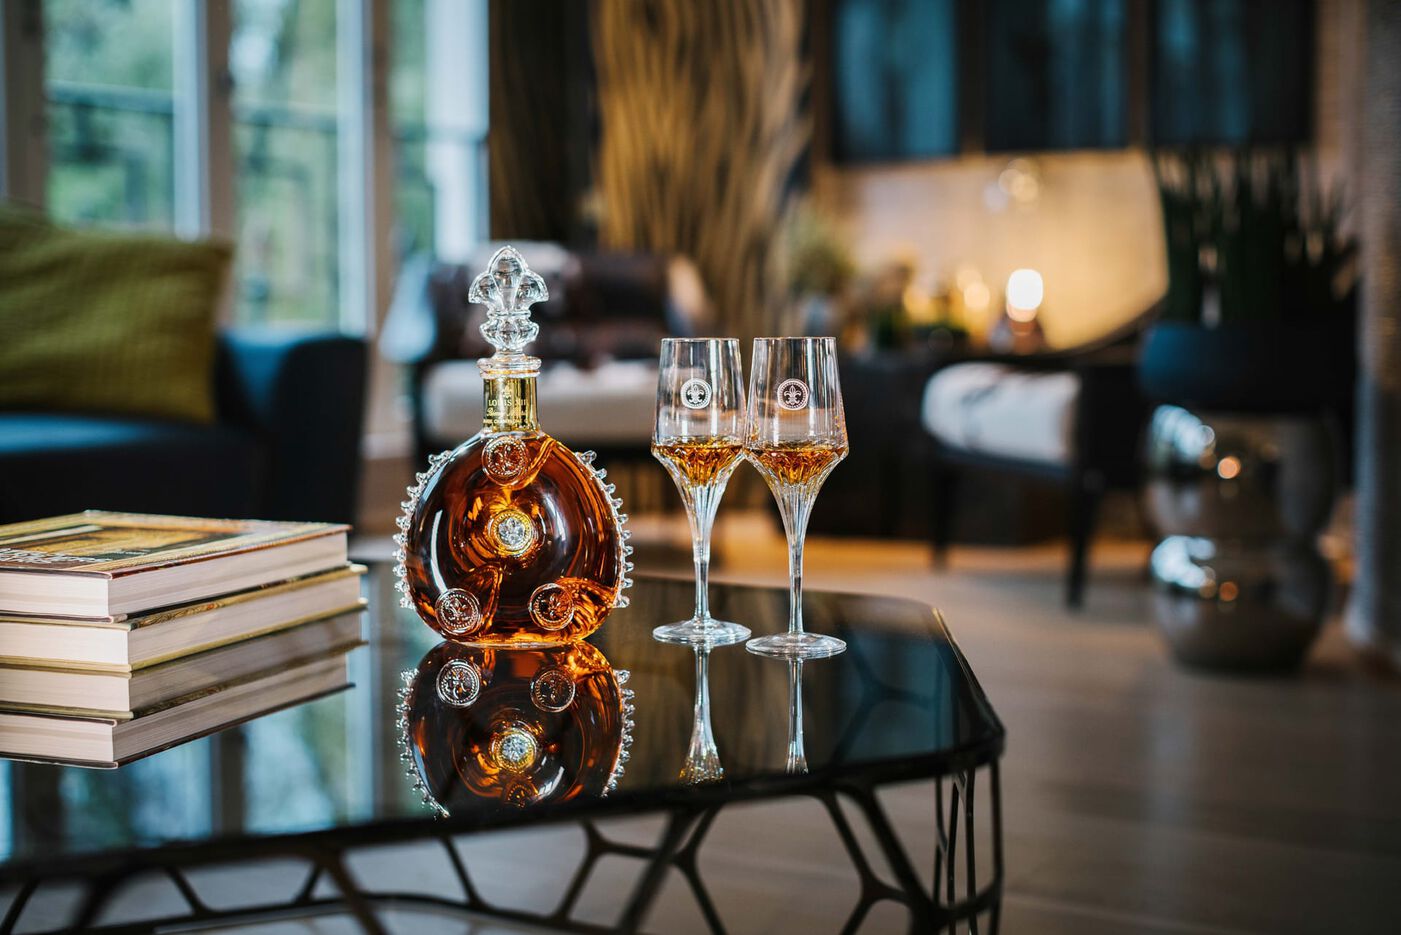 A lifestyle image of a LOUIS XIII decanter with two filled glasses, on a piano, a pile of books nearby